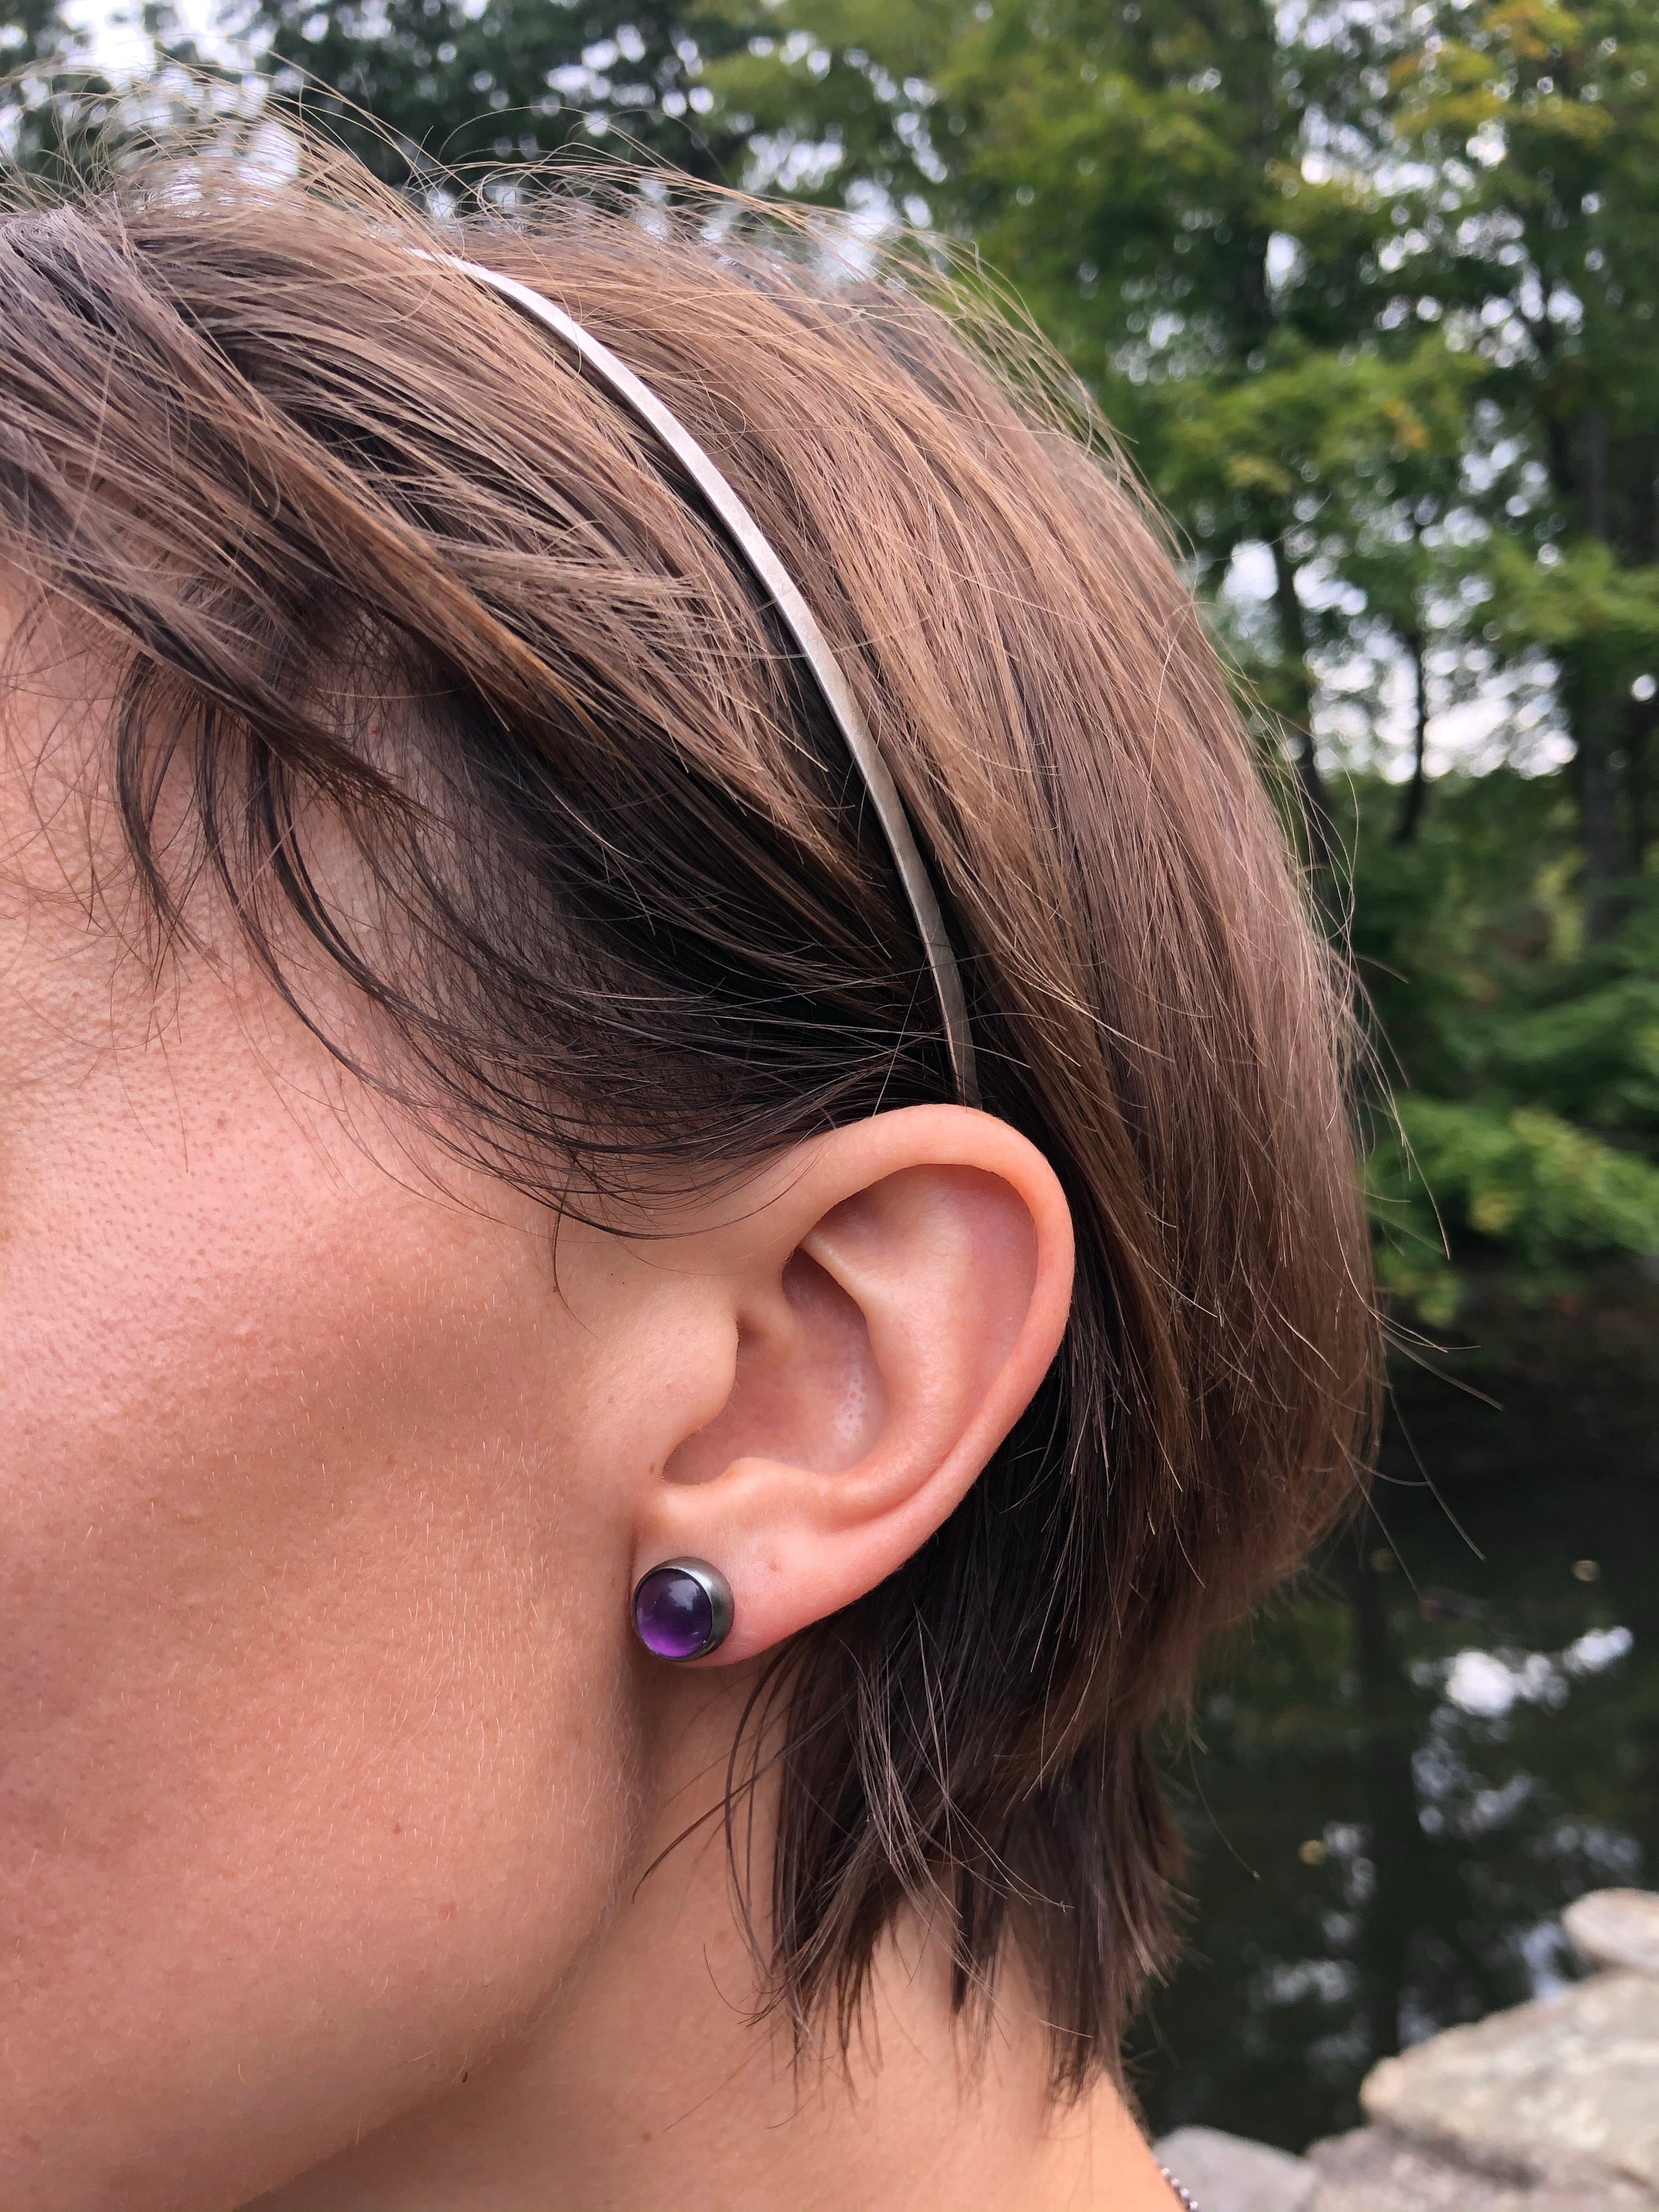 Amethyst Amulet Post earrings worn with sterling silver headband. Part of the Season of the Witch collection by Alex Lozier Jewelry.